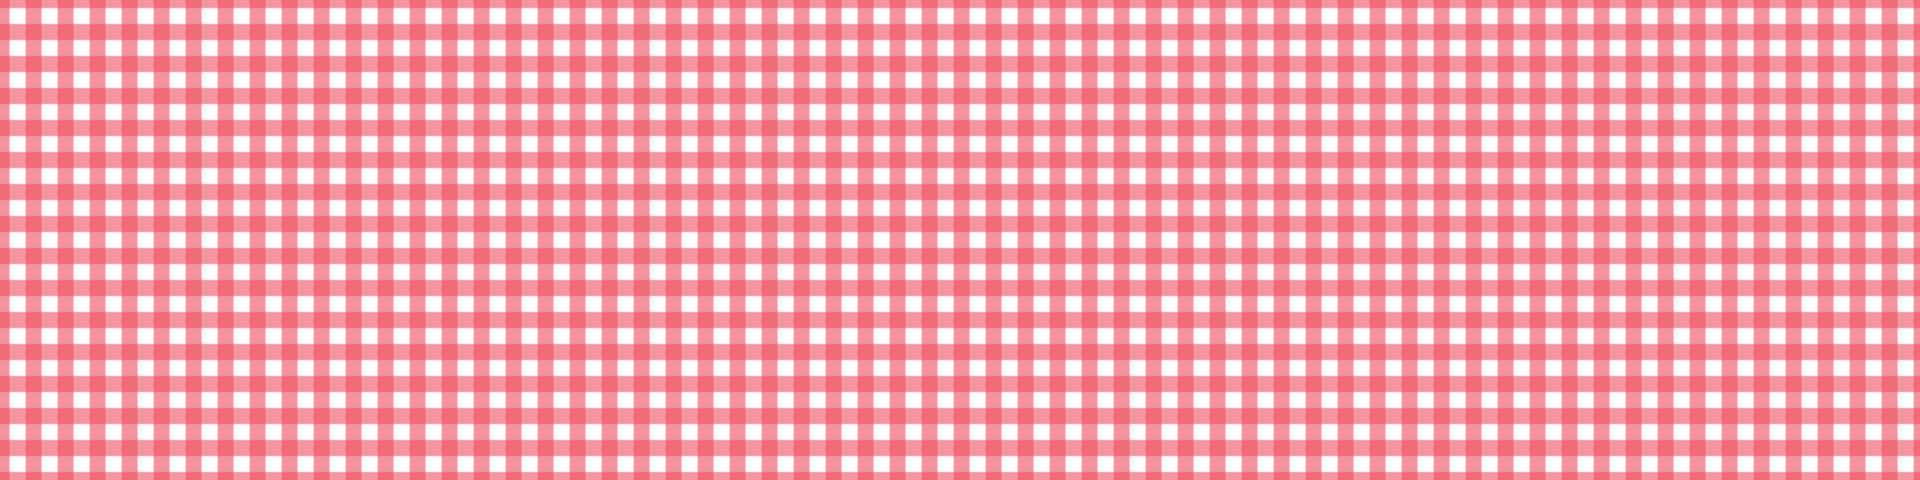 Red Picnic vichy pattern. Tablecloth for table. Square texture for gingham or cloth. Vector illustration